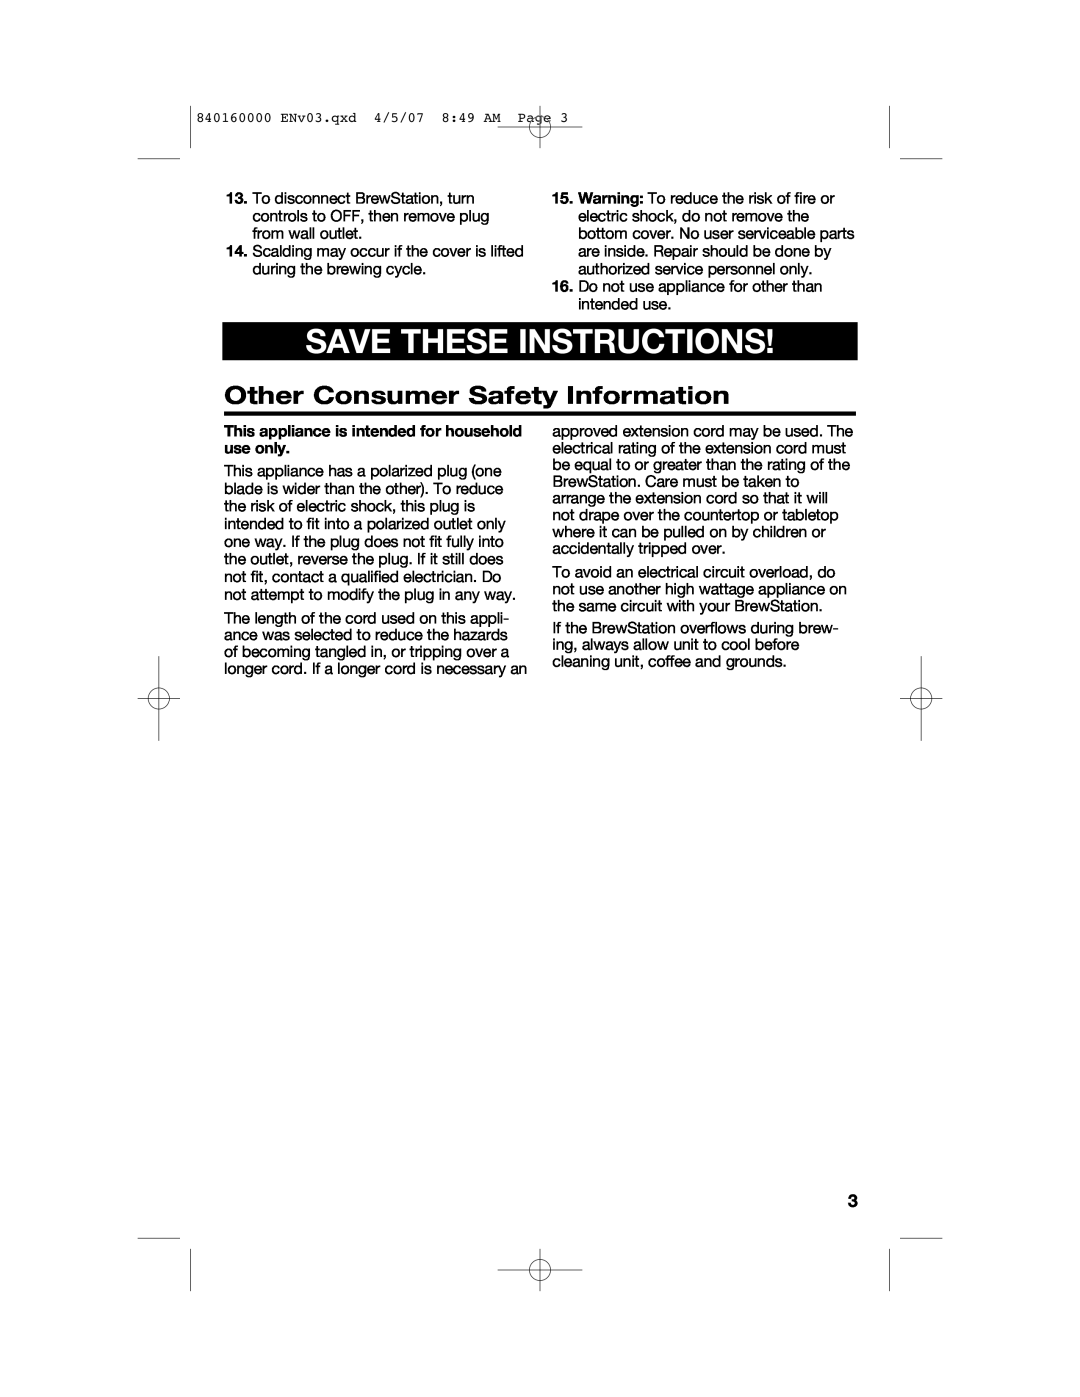 Hamilton Beach D43012B manual Save These Instructions, Other Consumer Safety Information 